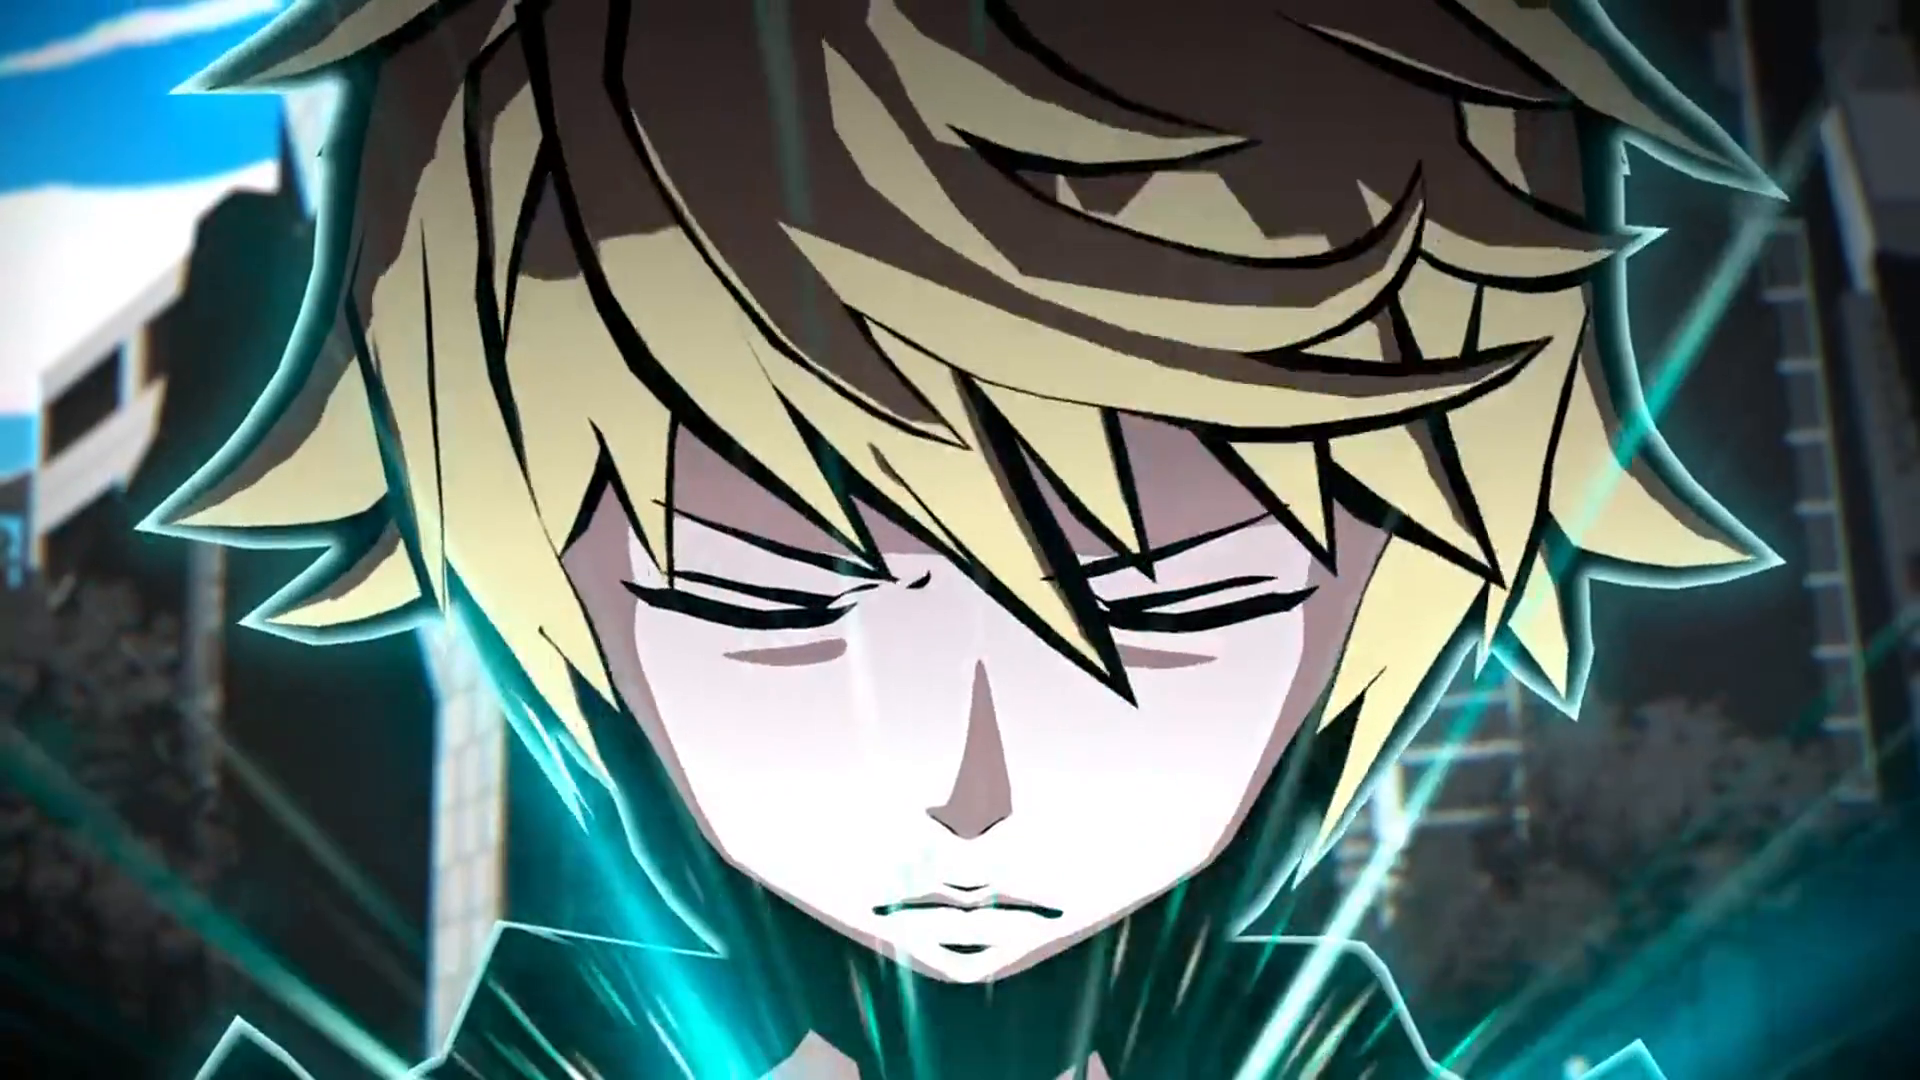 NEO: The World Ends With You is a fully 3D action RPG